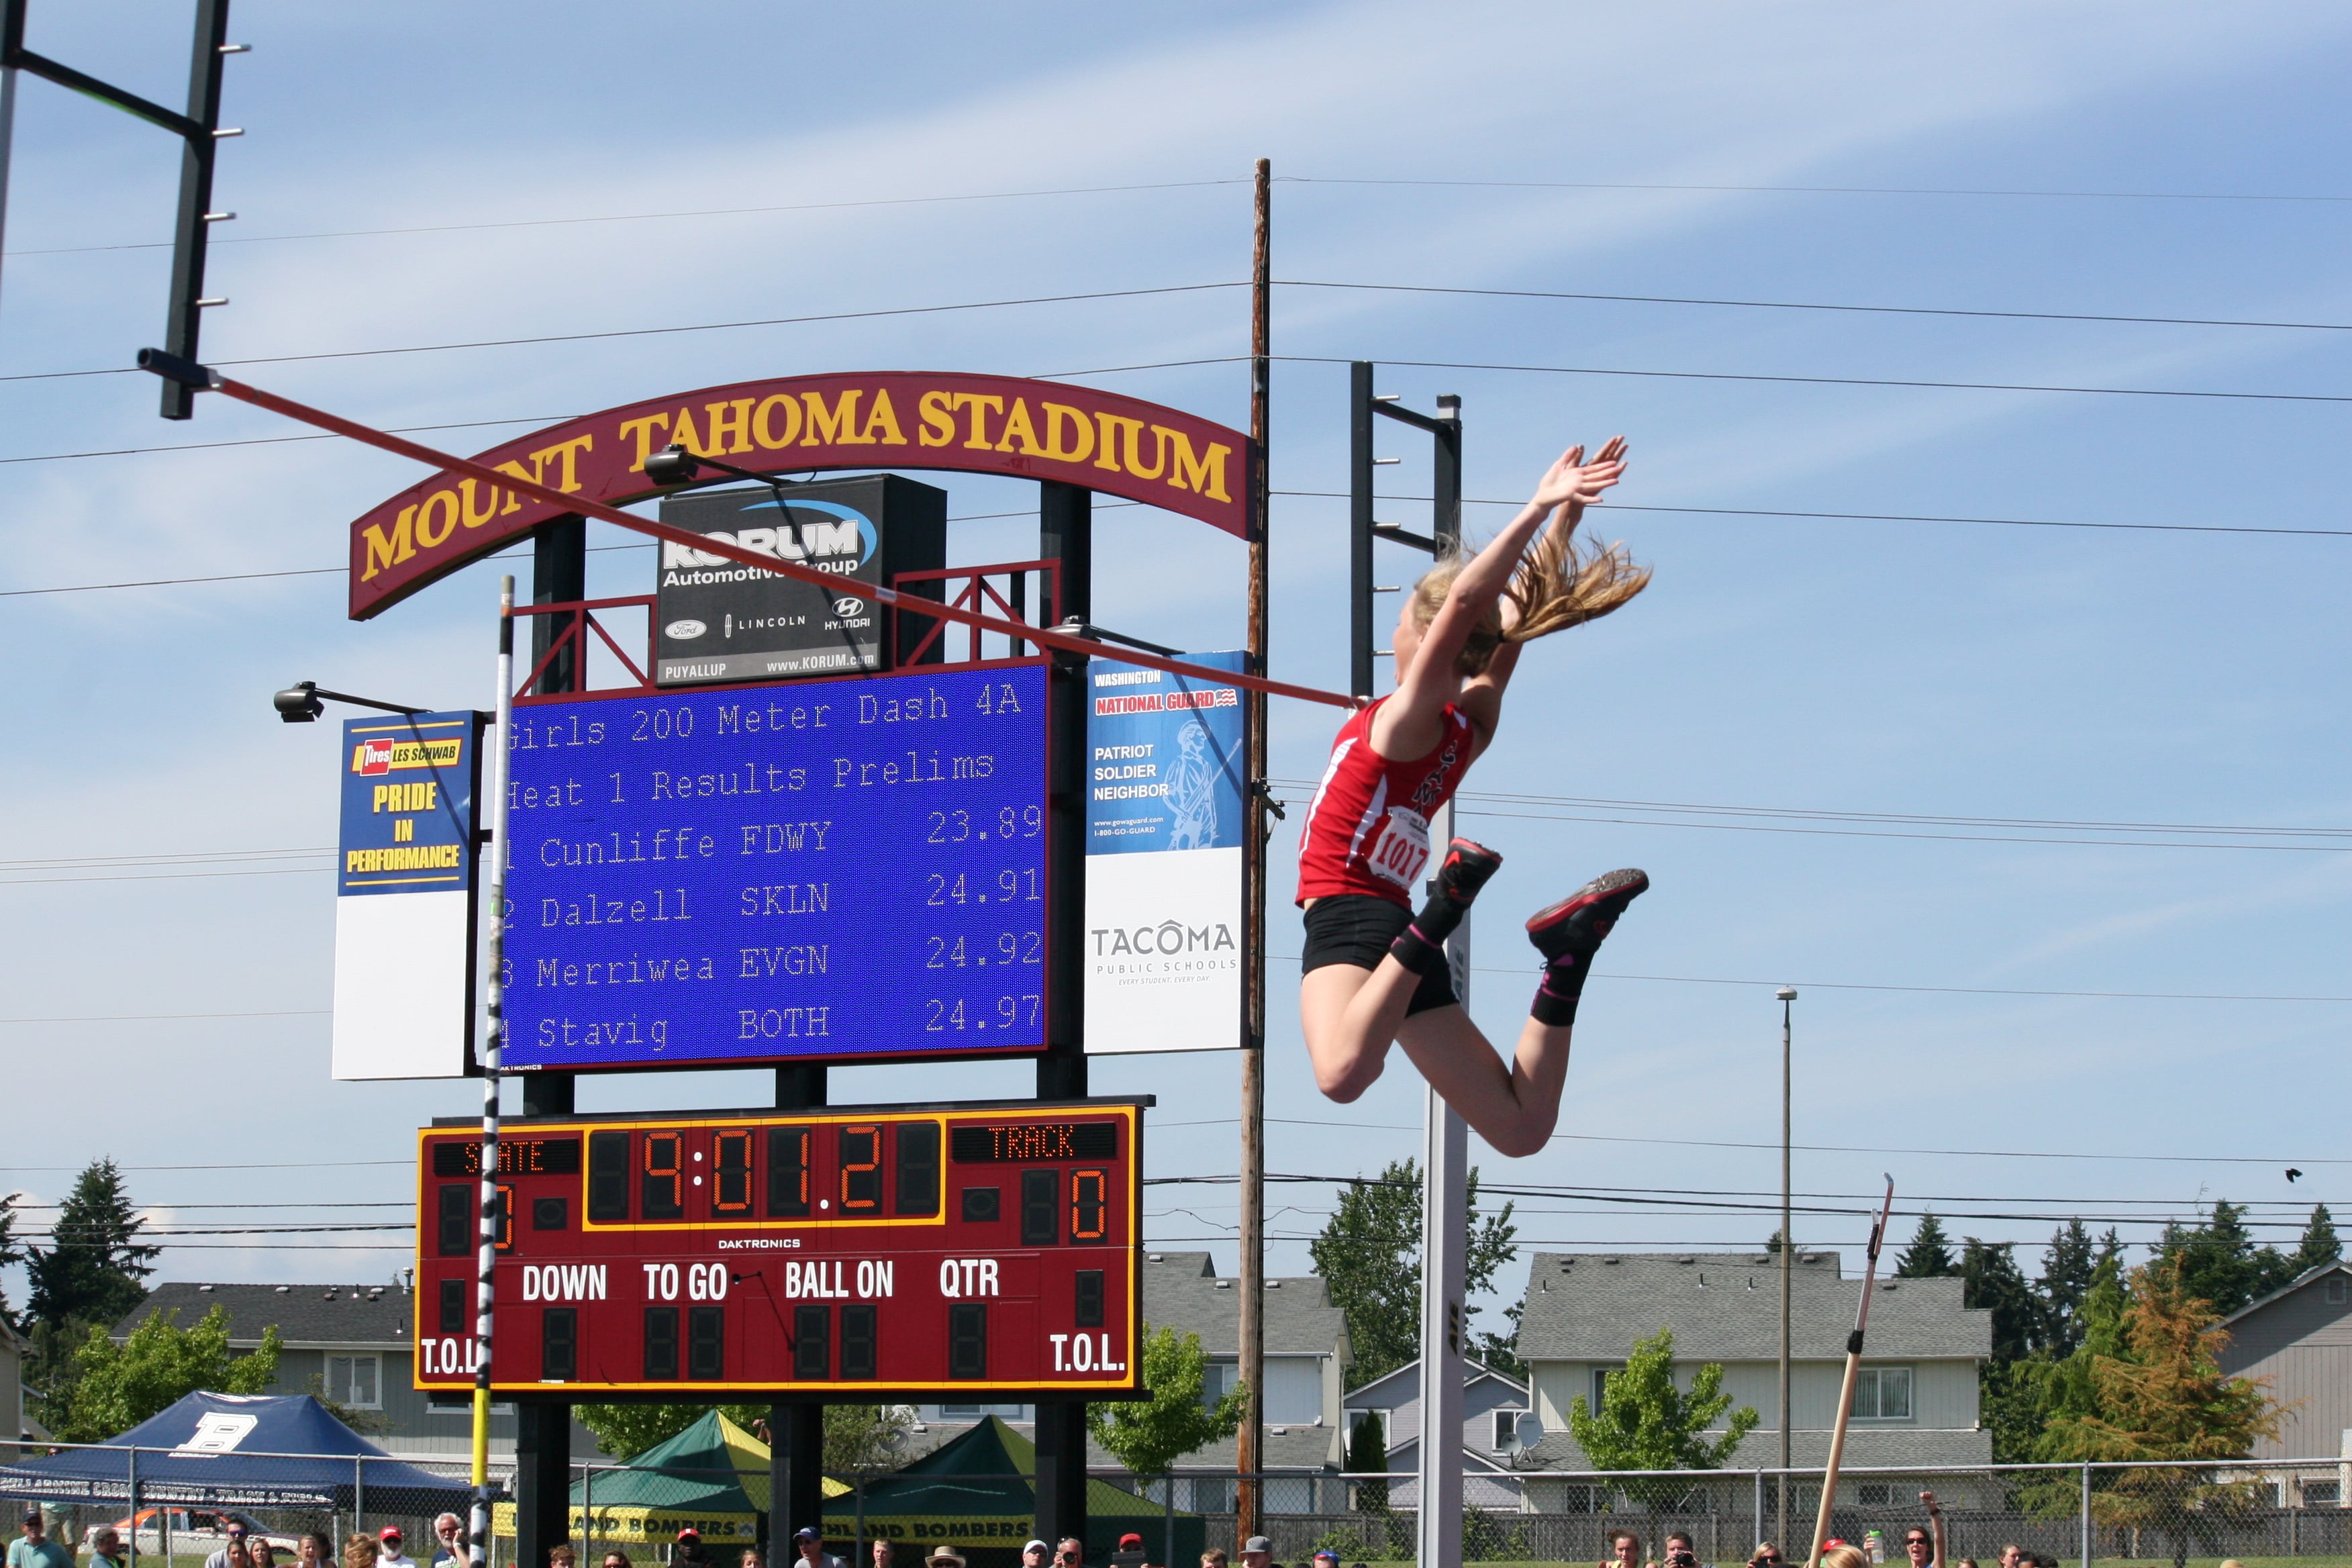 Caleigh Lofstead in free fall after clearing the bar set at 11 feet, 9 inches. She clinched third place in the pole vault at state.